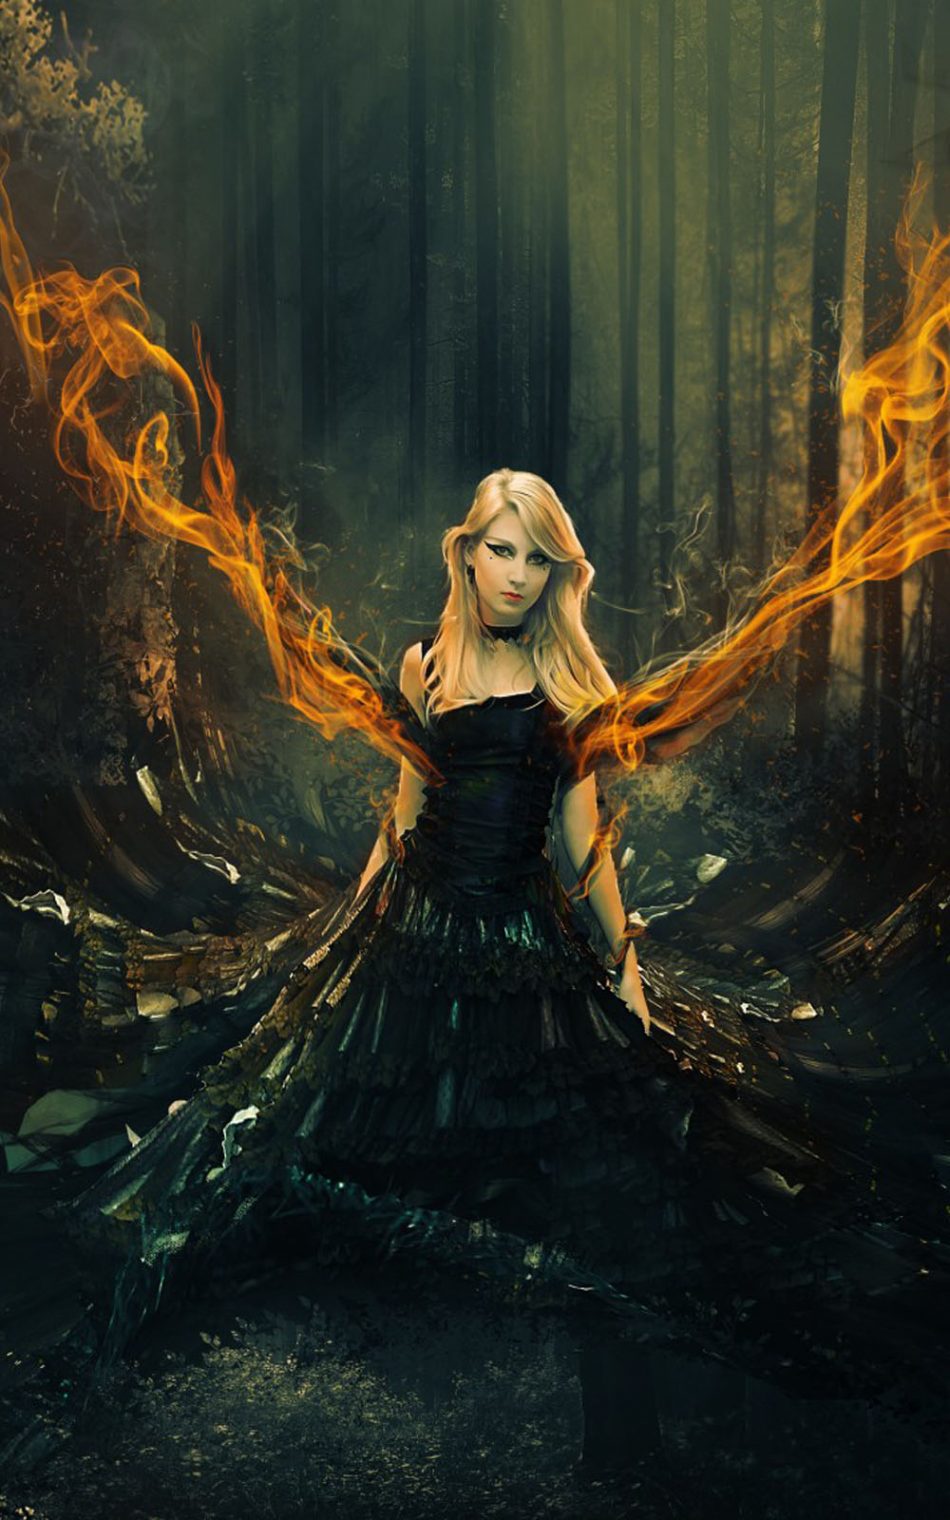 Girl In Flame Wallpapers